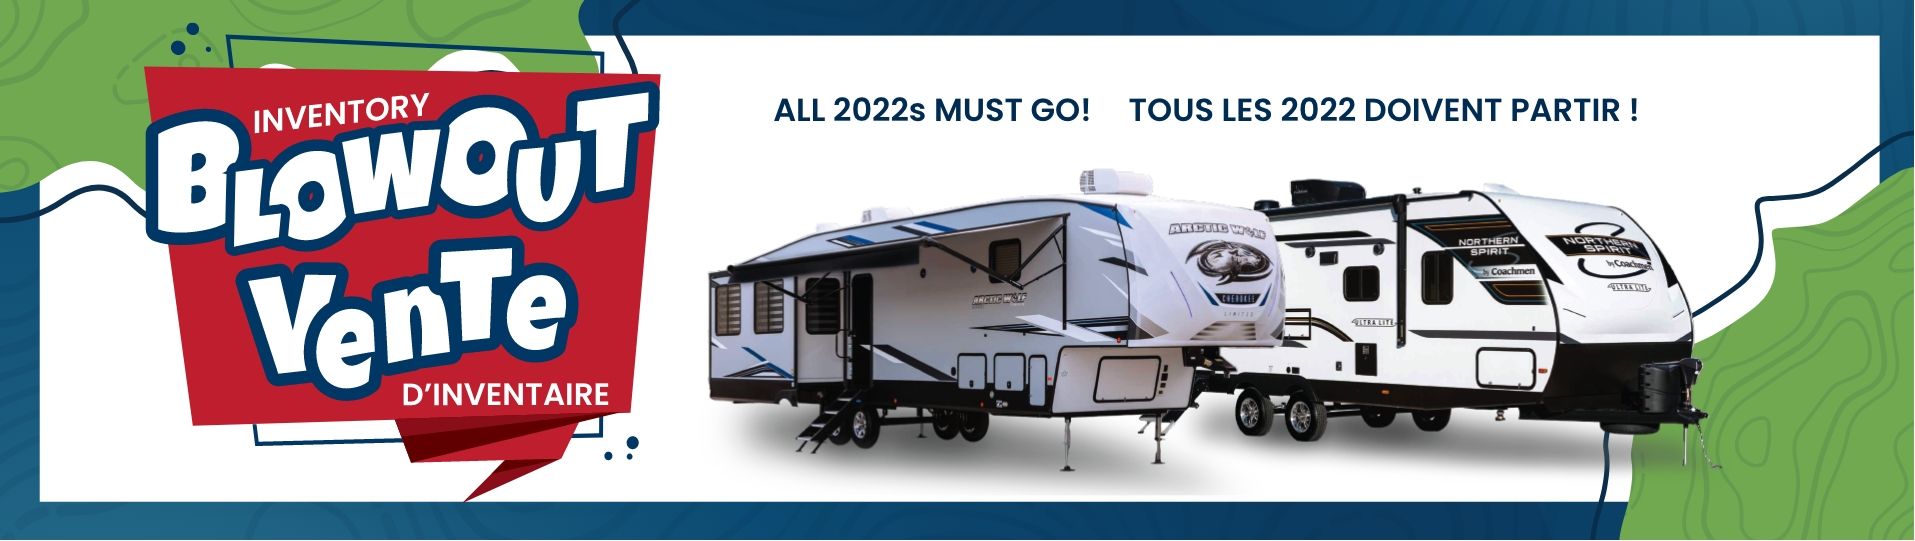 Inventory Blowout on all 2022 RVs!